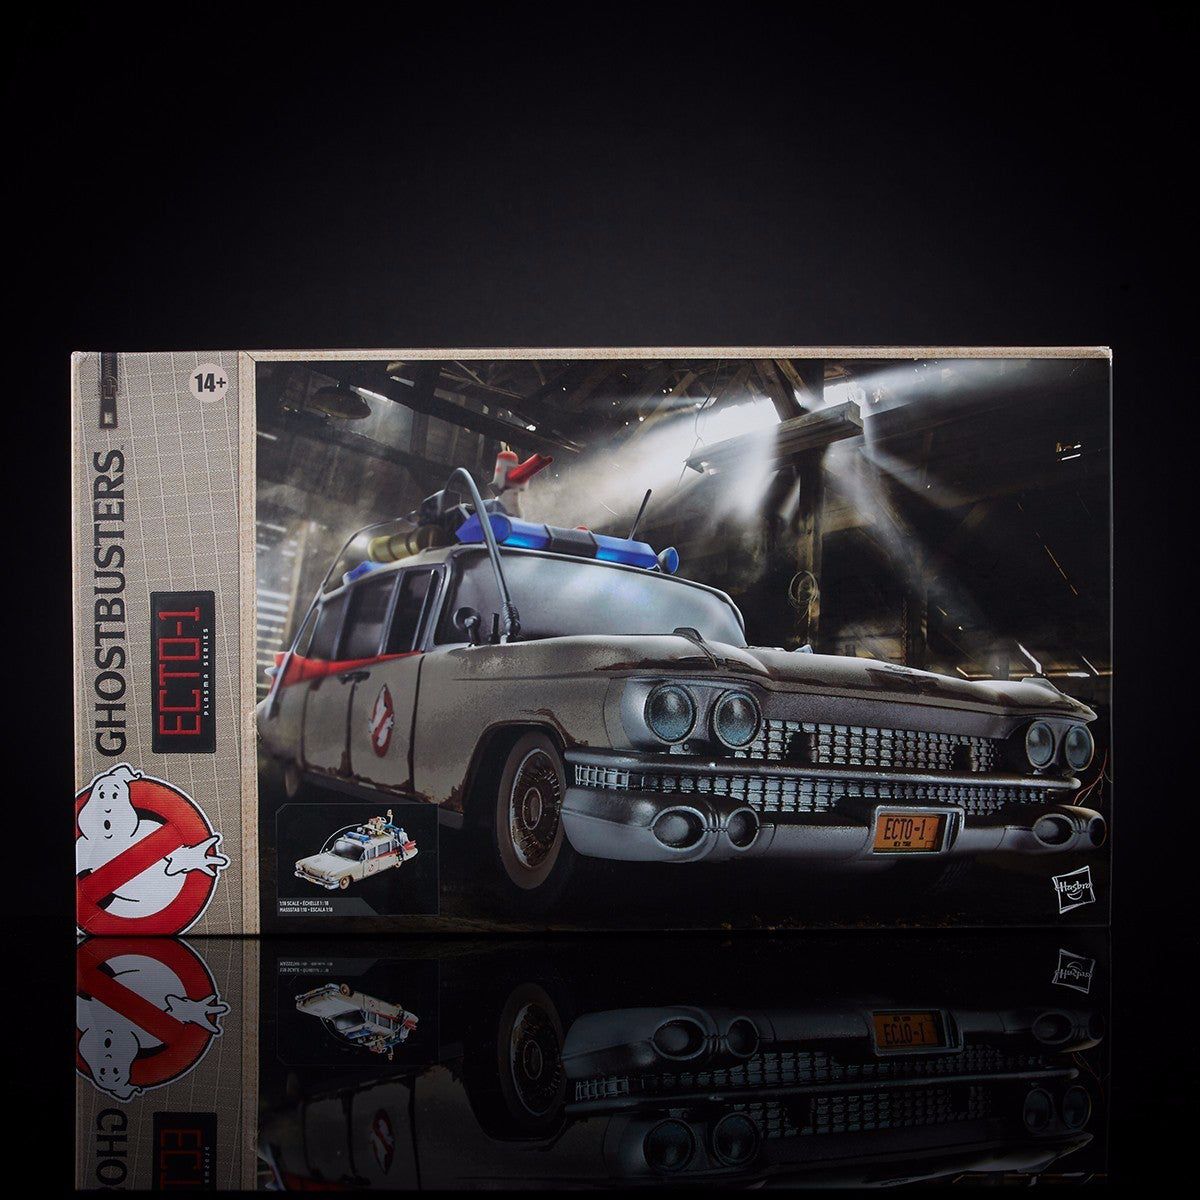 Ghostbusters Afterlife Ecto 1 Toy images #1